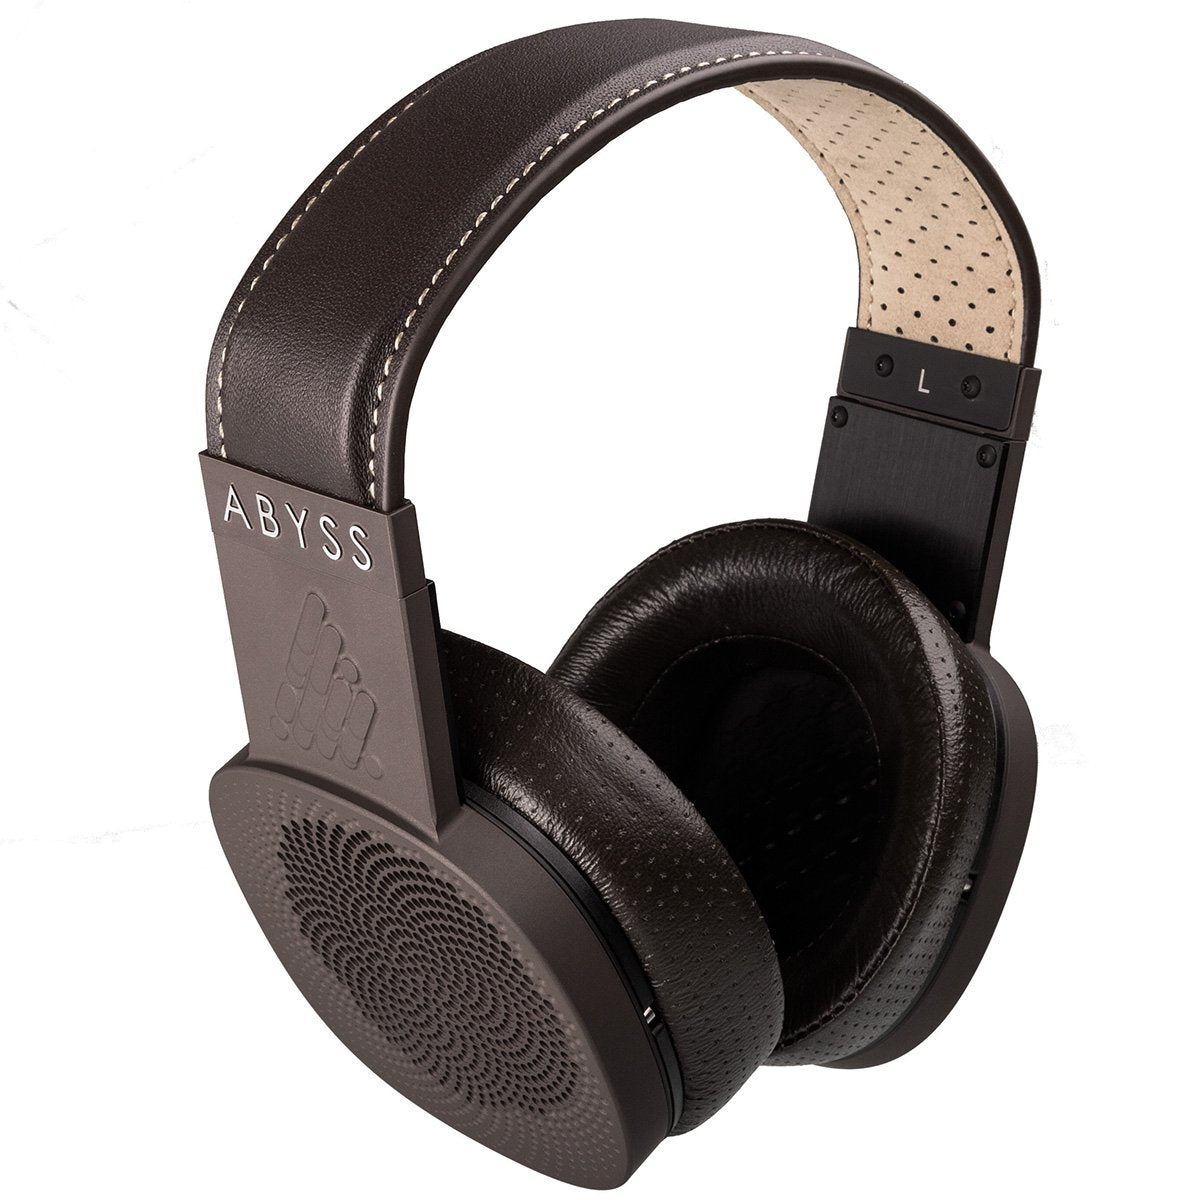 Abyss Diana V2 Reference headphones